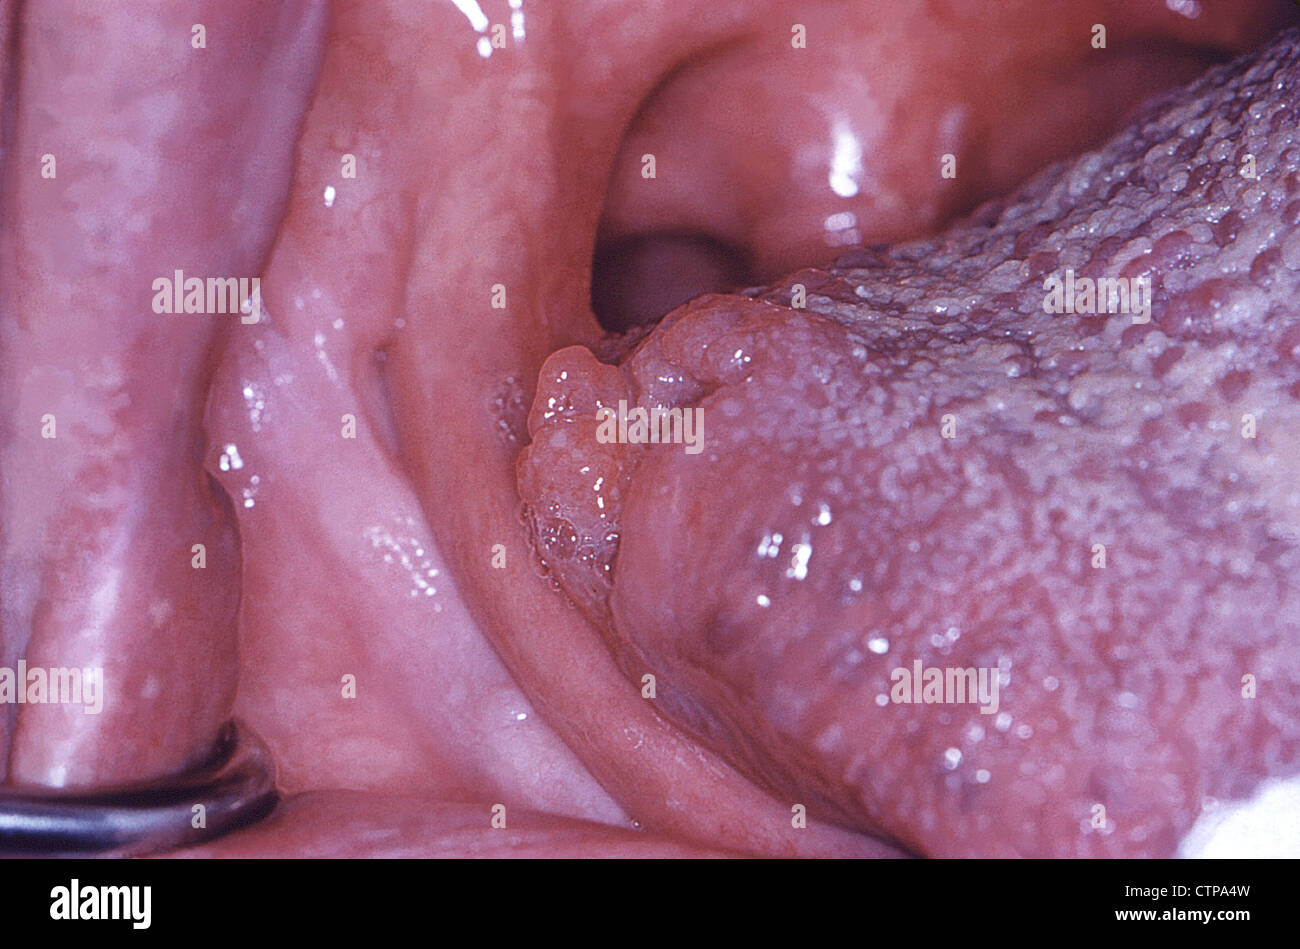 histoplasmosis infection of the tongue Stock Photo